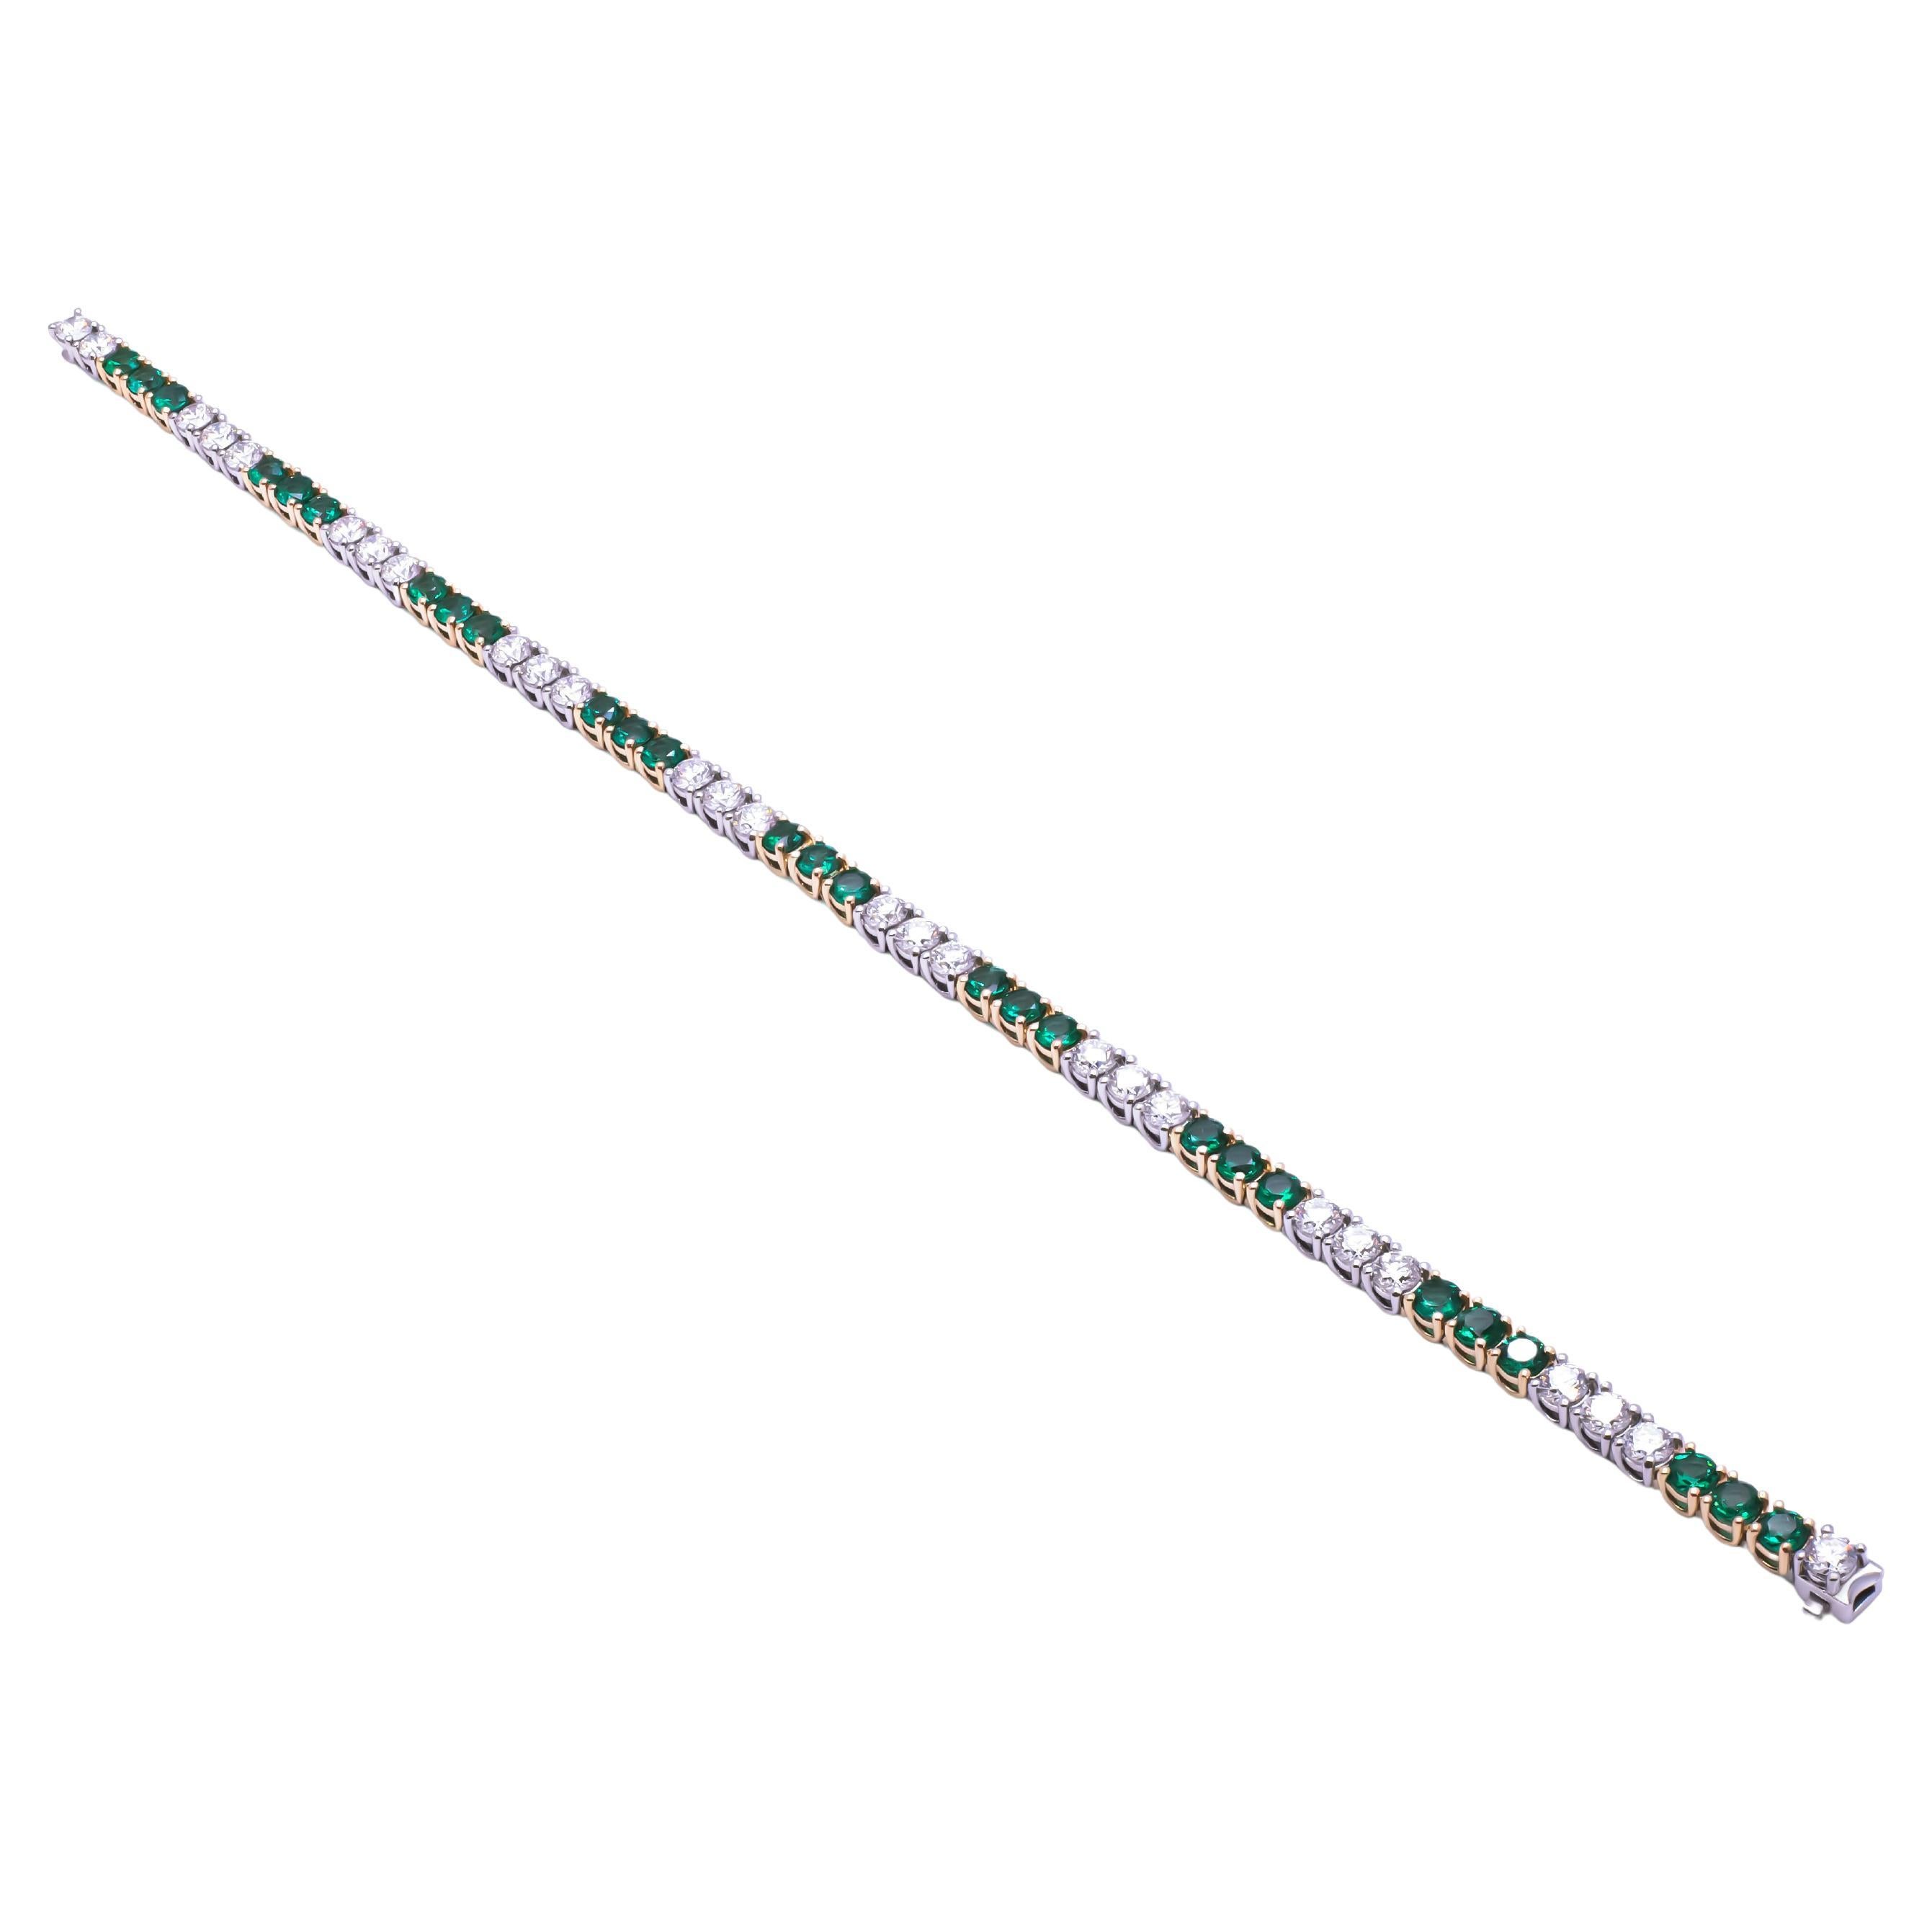 Introducing the epitome of timeless elegance, the Tennis Bracelet in 18K Yellow Gold and Platinum adorned with exquisite green emeralds and dazzling diamonds. This meticulously crafted bracelet seamlessly combines opulence and sophistication to